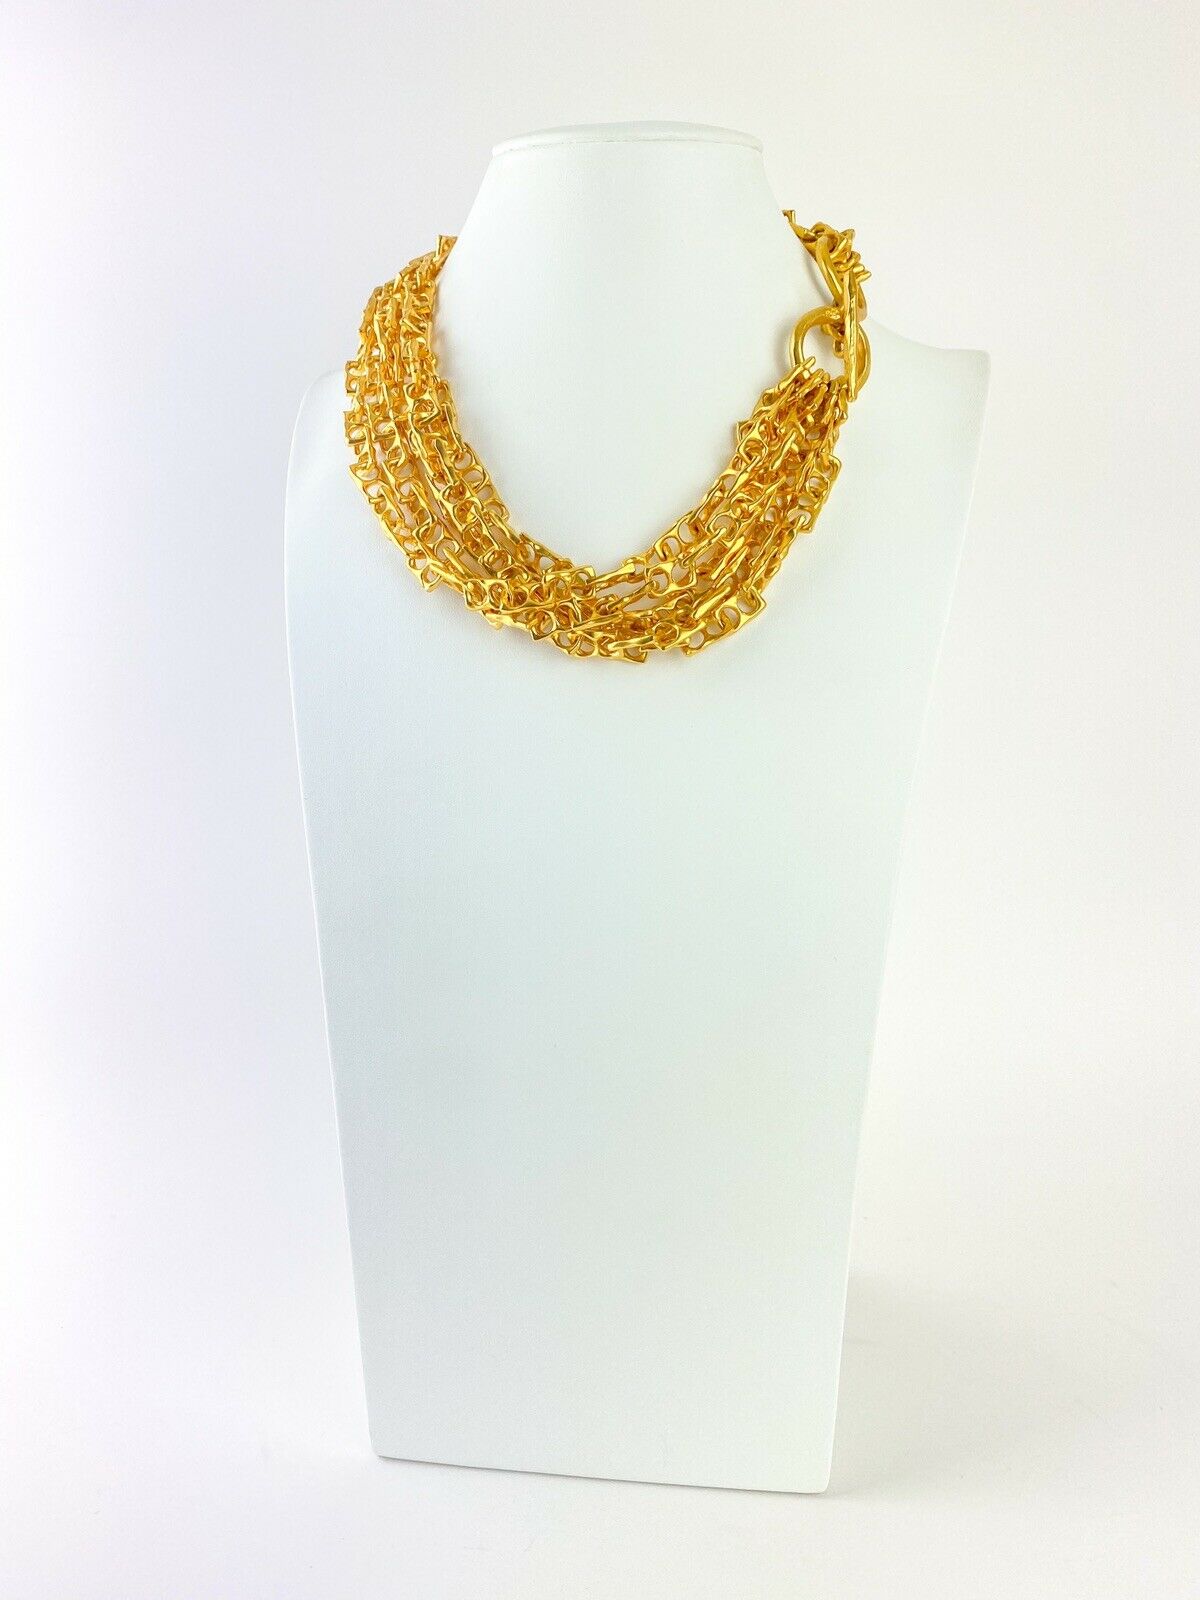 【SOLD OUT】Karl Lagerfeld Vintage Gold Tone Multi-Strands Chain Necklace Collector Piece